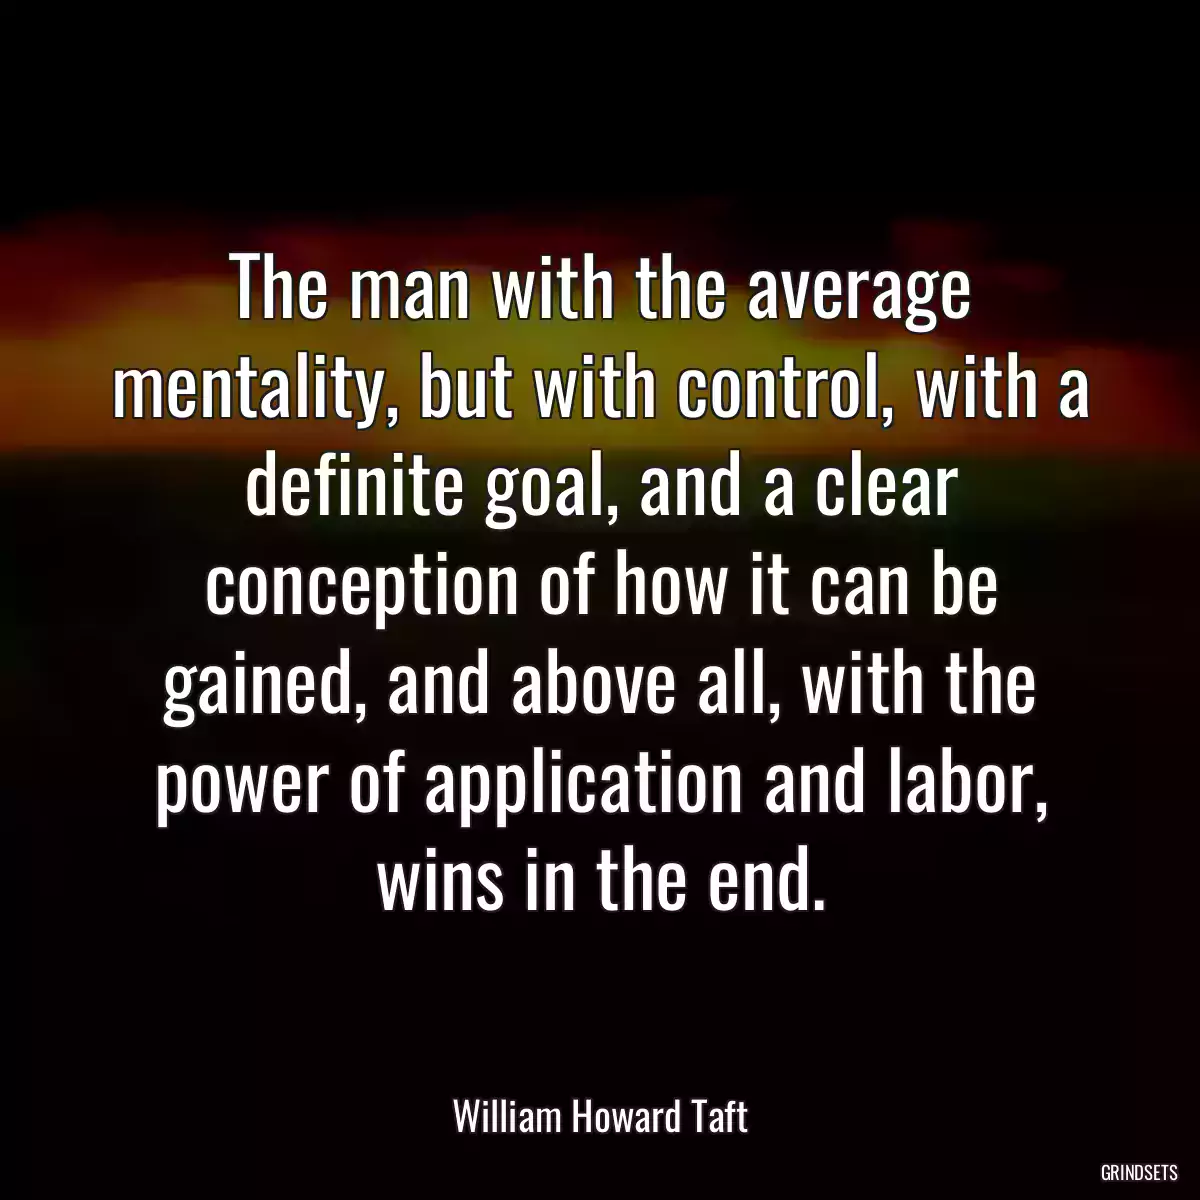 The man with the average mentality, but with control, with a definite goal, and a clear conception of how it can be gained, and above all, with the power of application and labor, wins in the end.